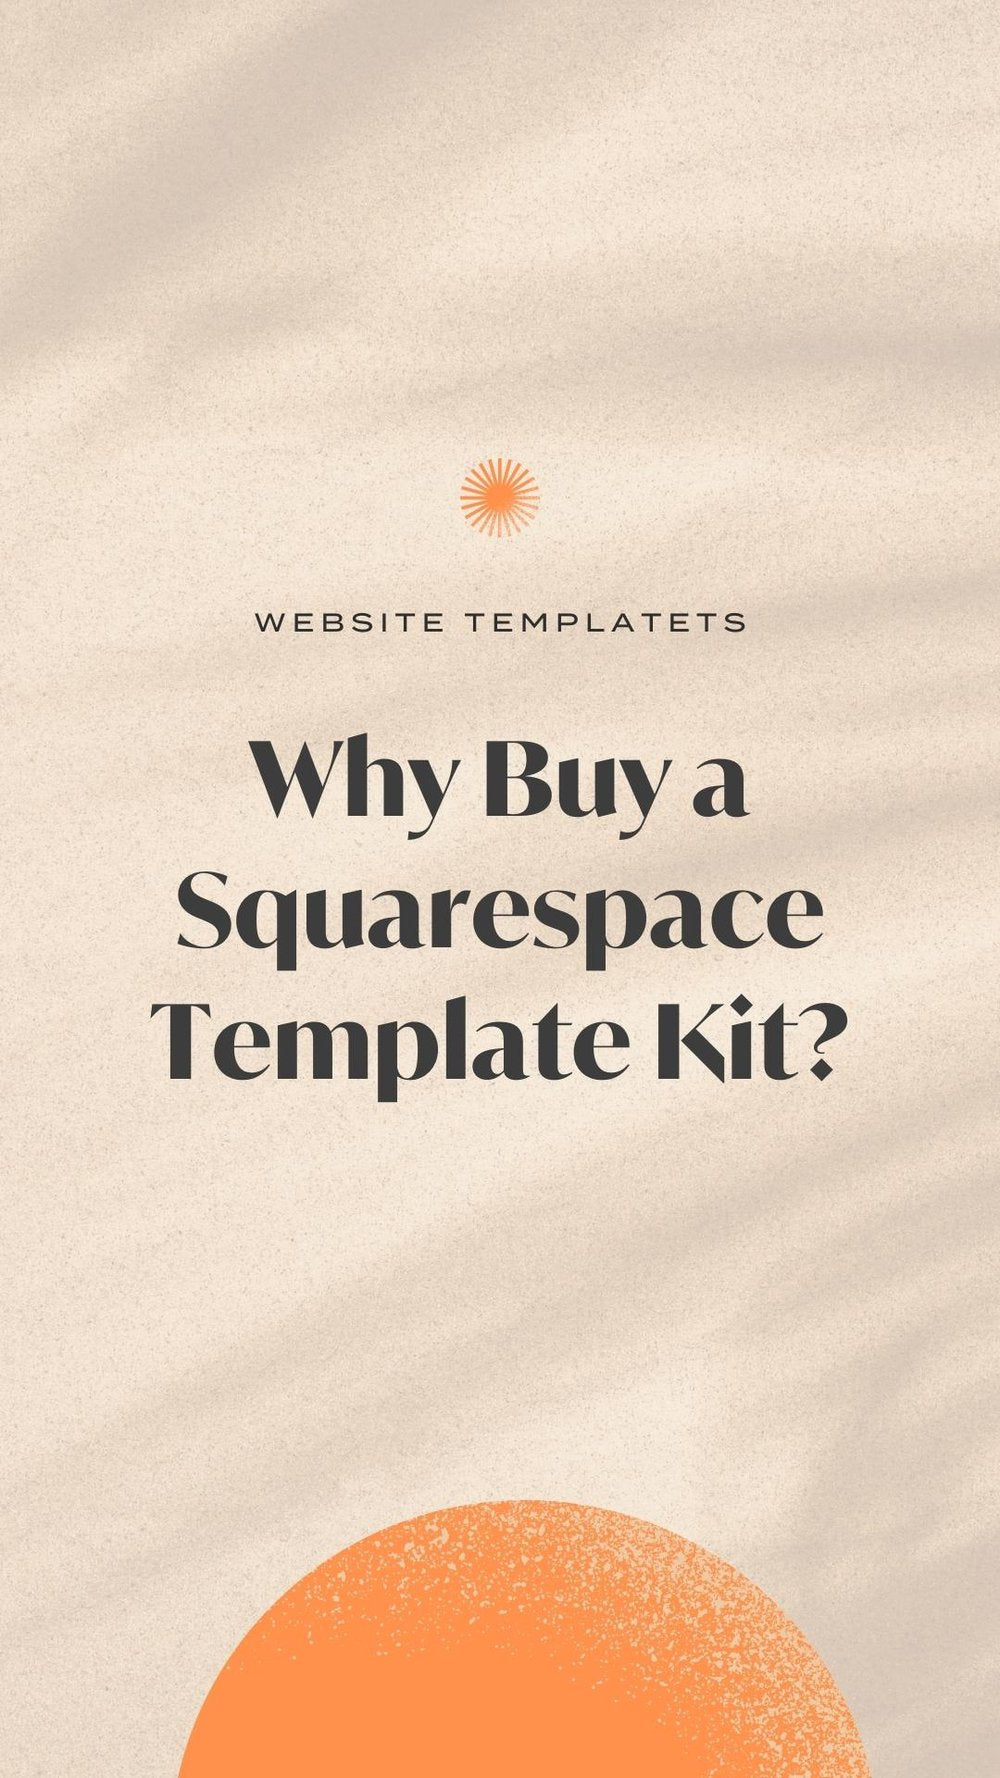 Why Buy a Premium Squarespace Template Kit?